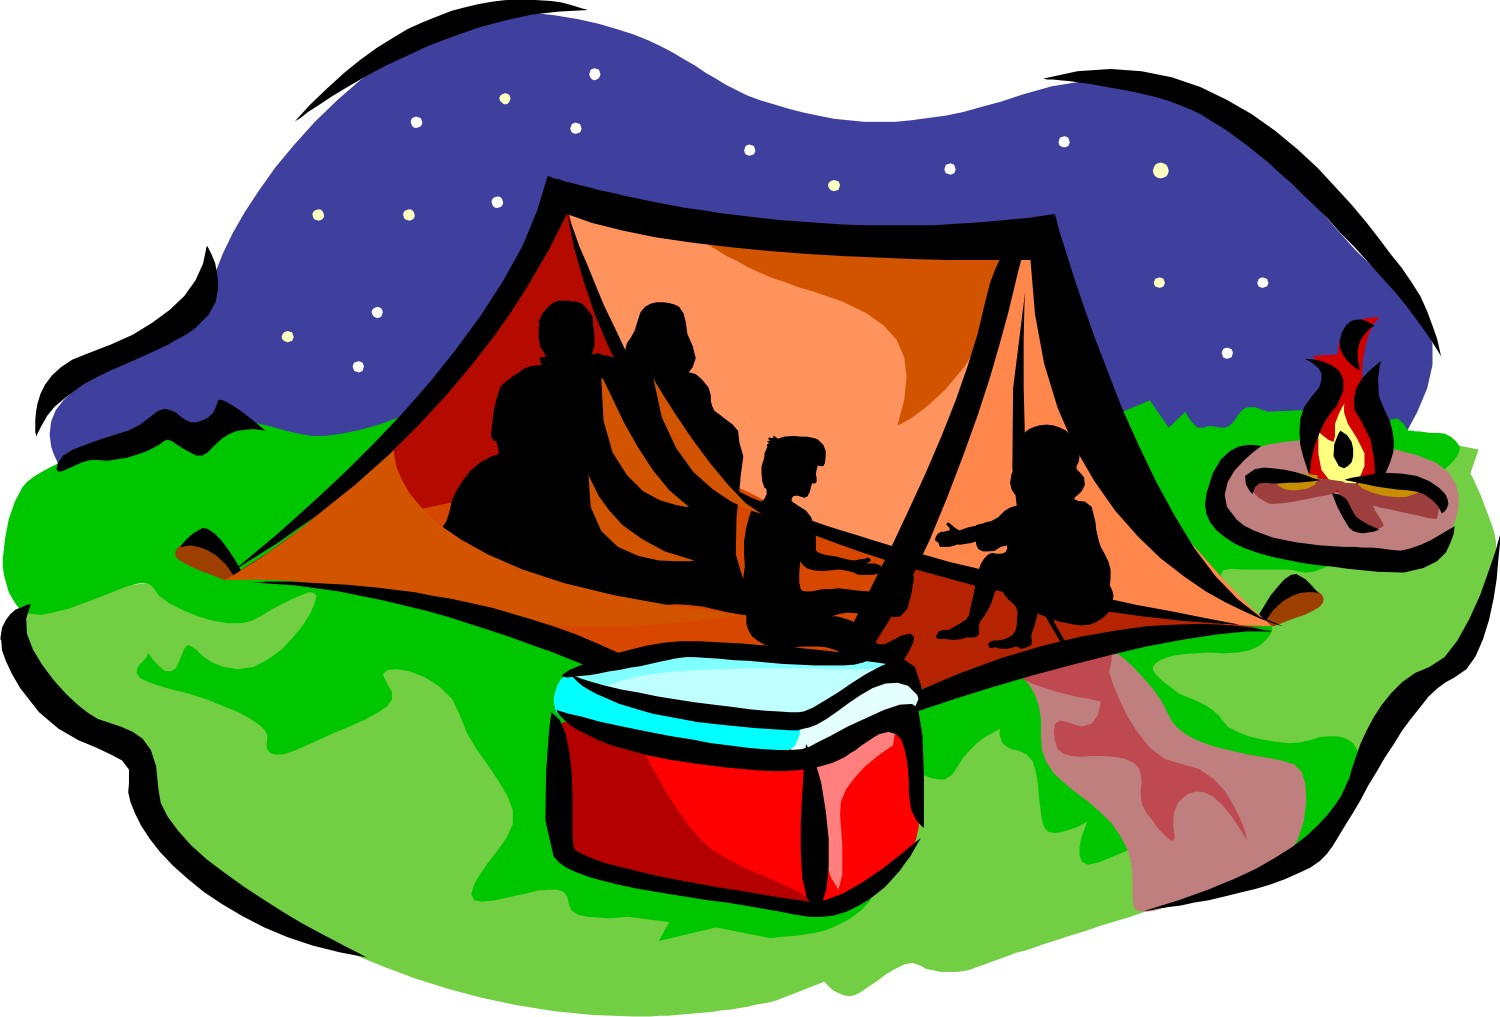 Clipart Sleeping Bag Camping - ClipArt Best